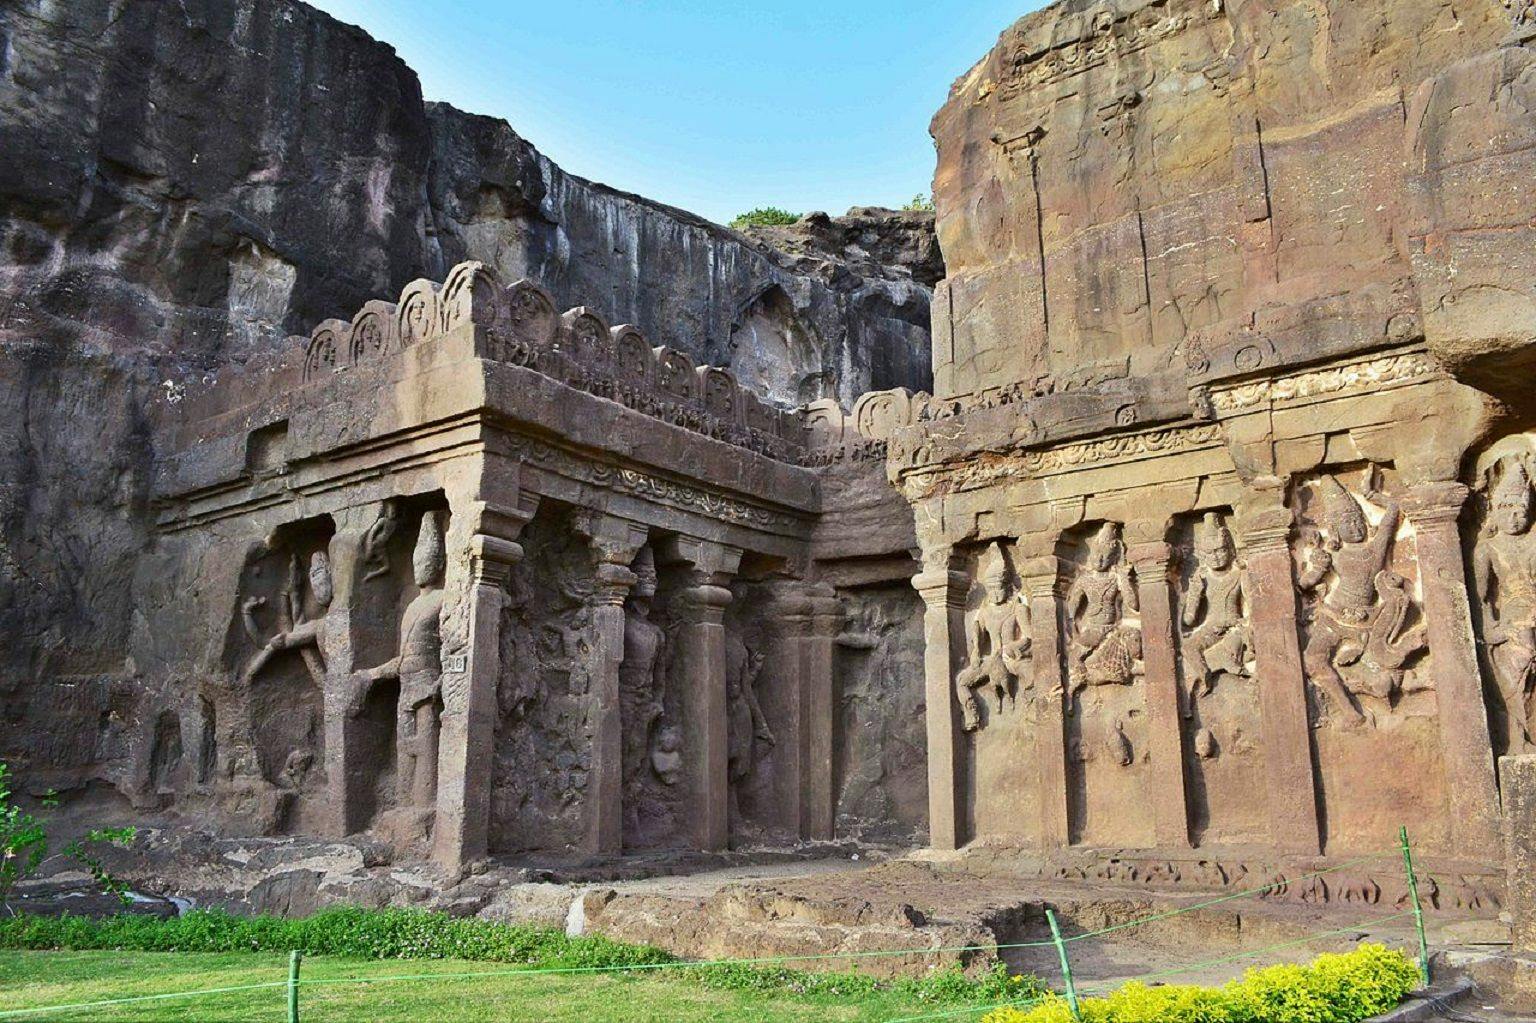 Exterior wall of the Kailasa temple